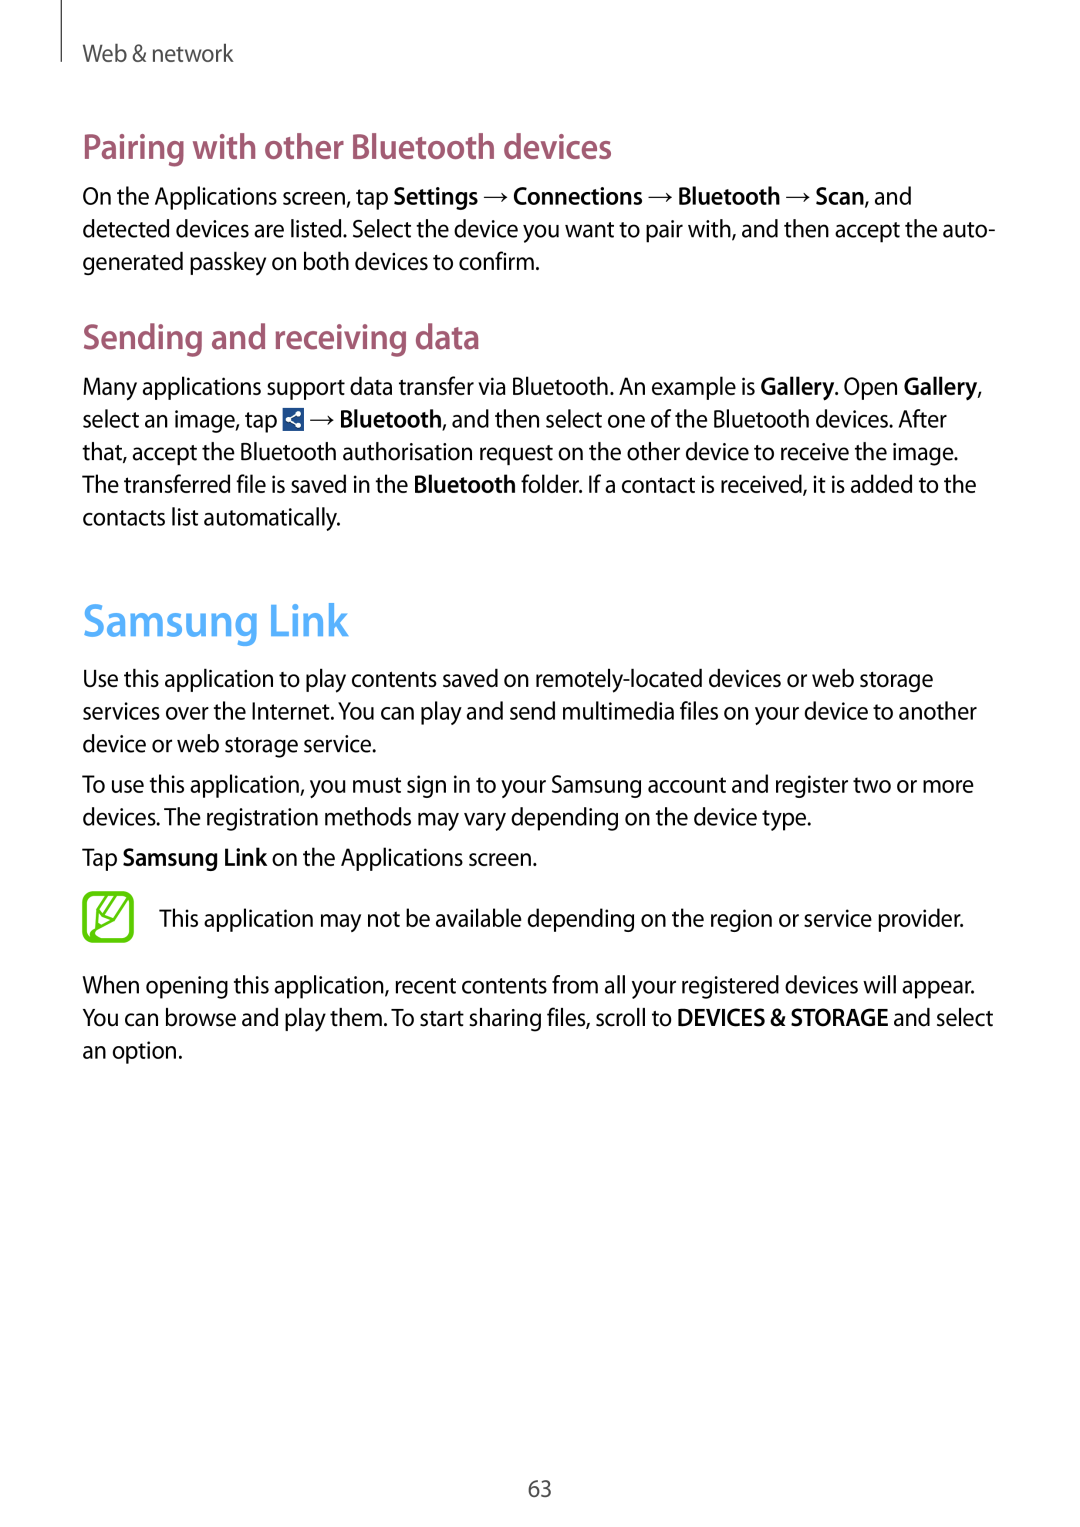 Samsung GT-I9060ZWAXFE manual Samsung Link, Pairing with other Bluetooth devices, Sending and receiving data, Web & network 